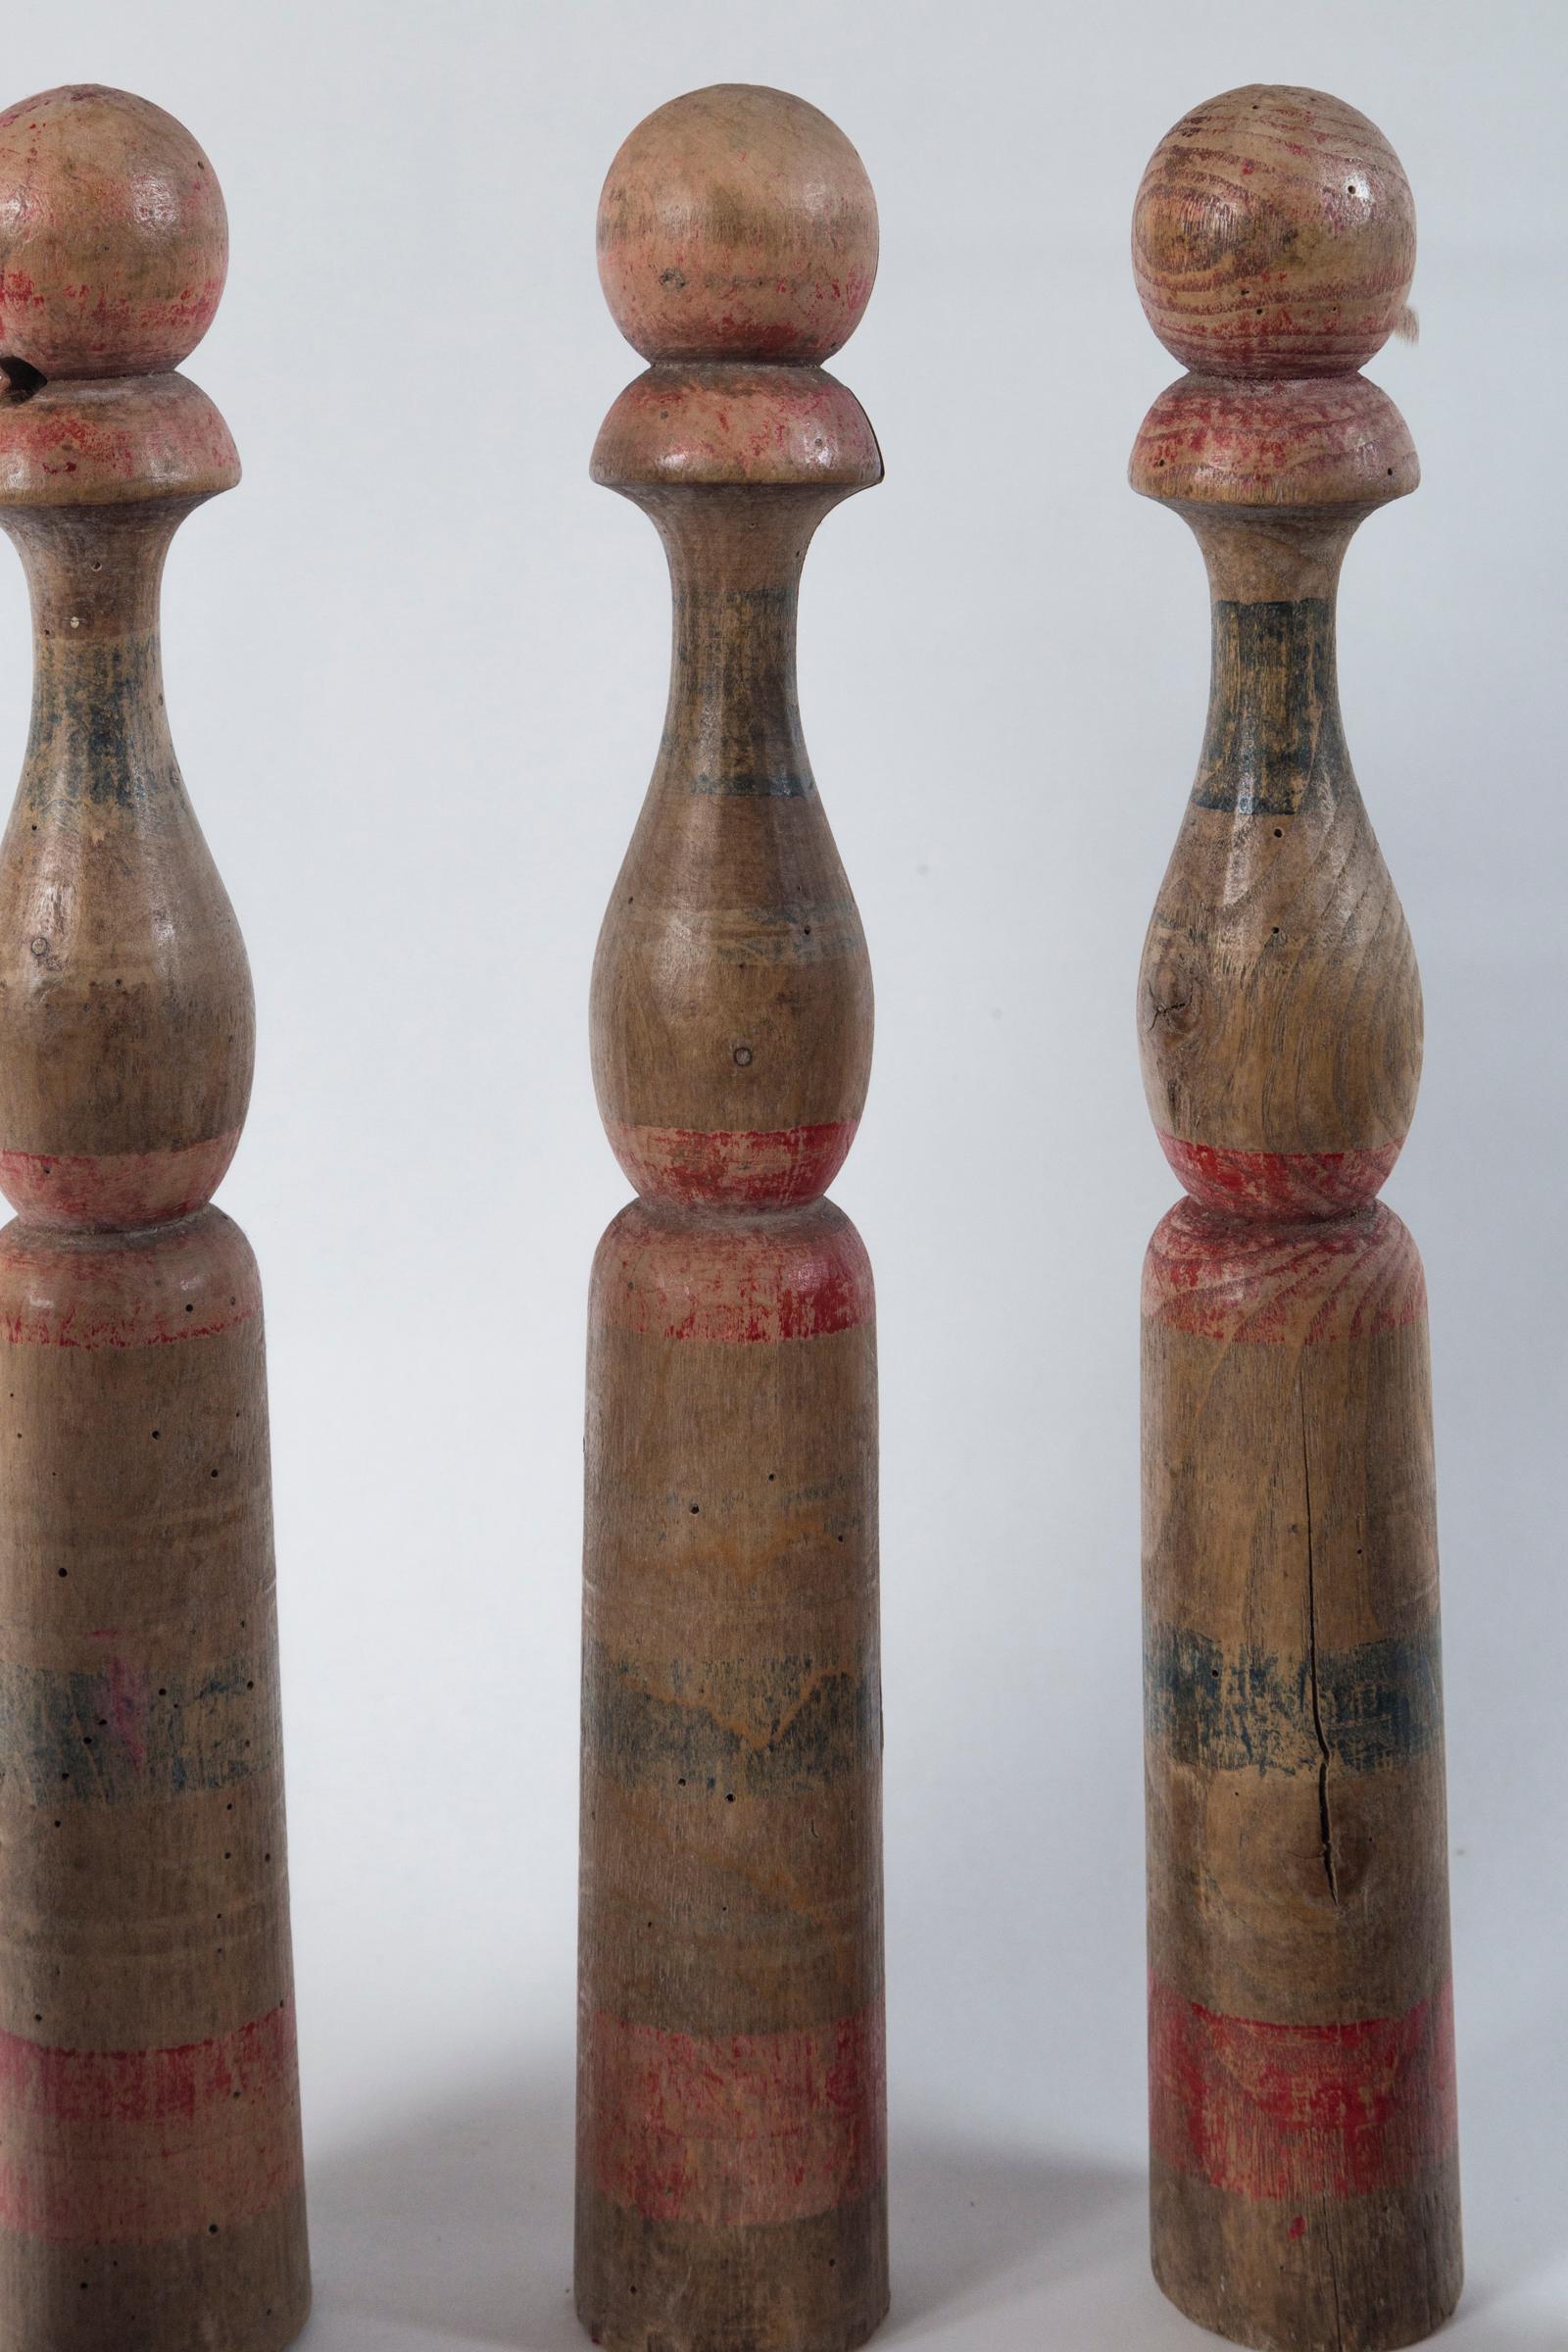 Early 20th Century Vintage French Skittle Game 'Jeu de Quilles de Neuf', circa 1920 For Sale